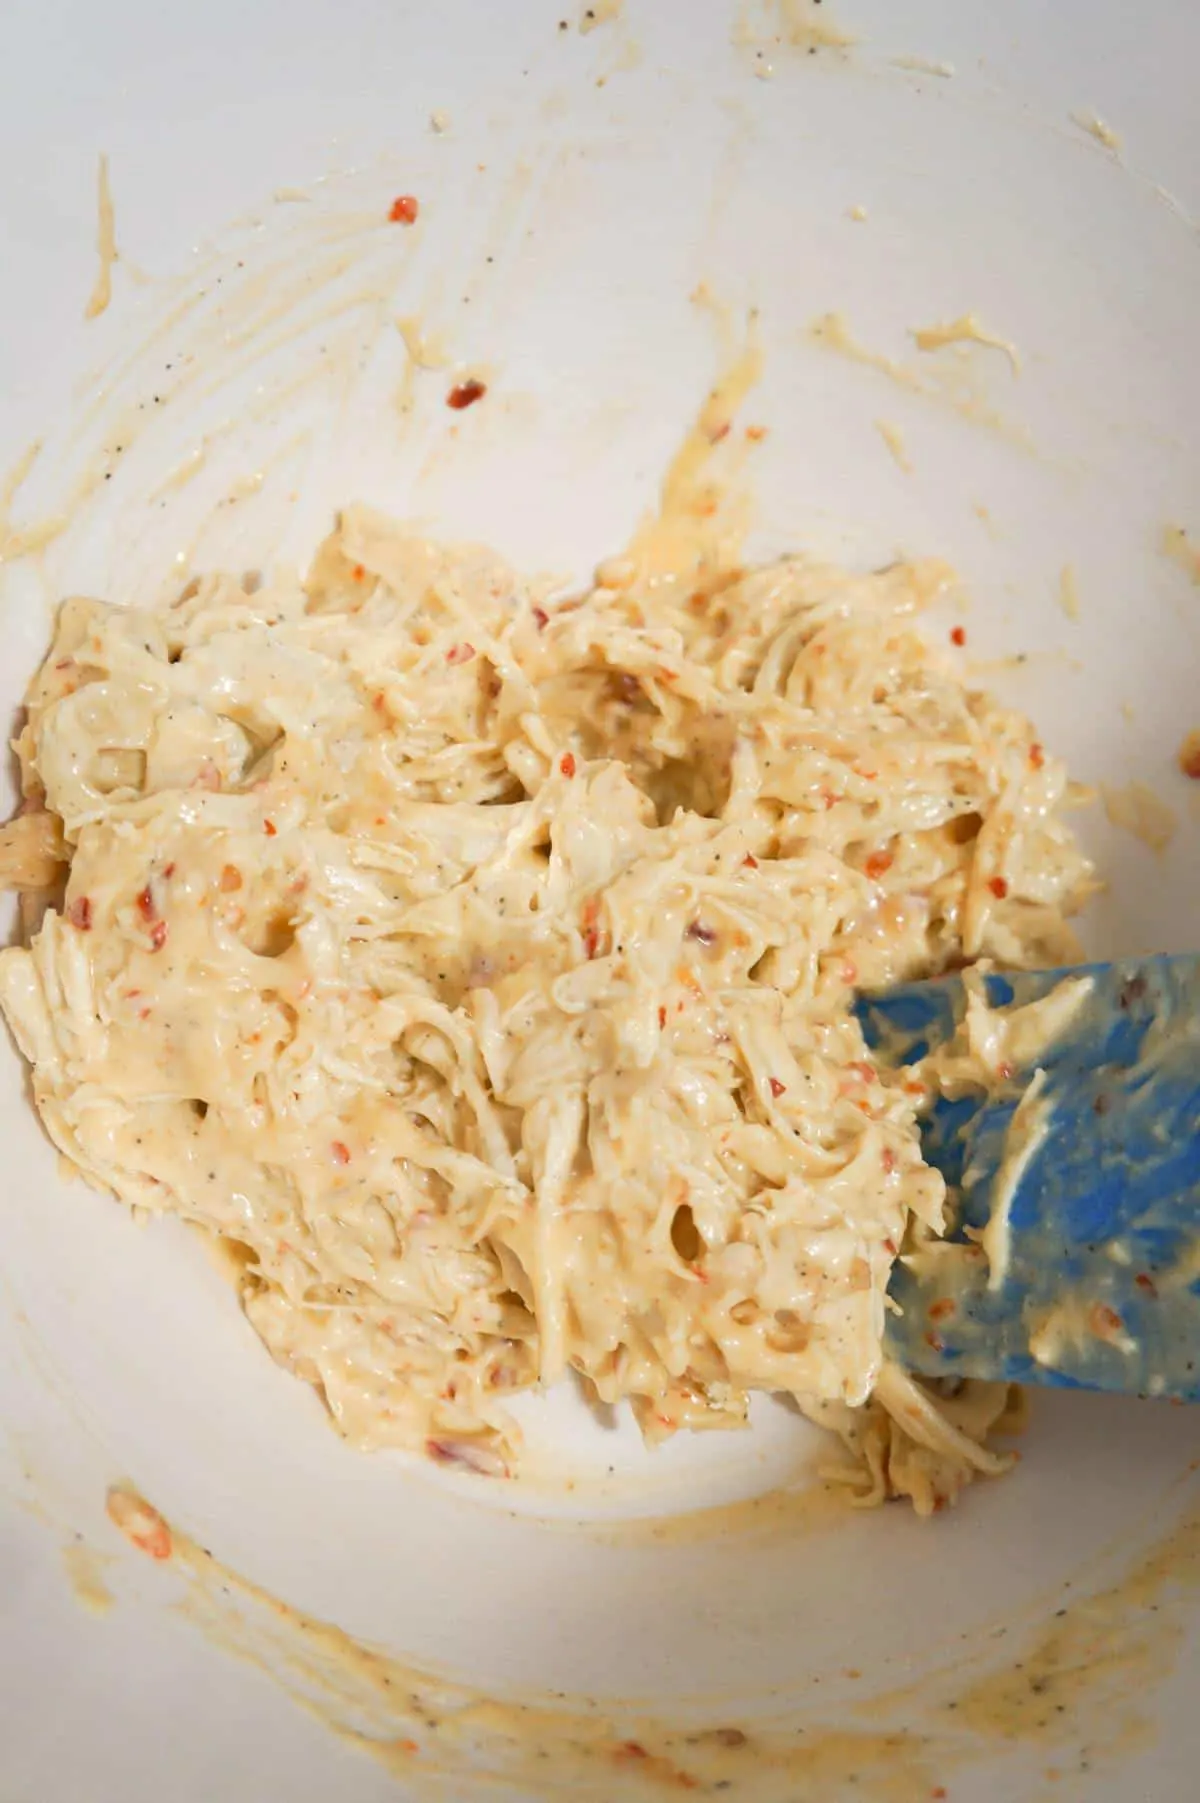 shredded chicken tossed in mayo and sweet chili sauce in a mixing bowl